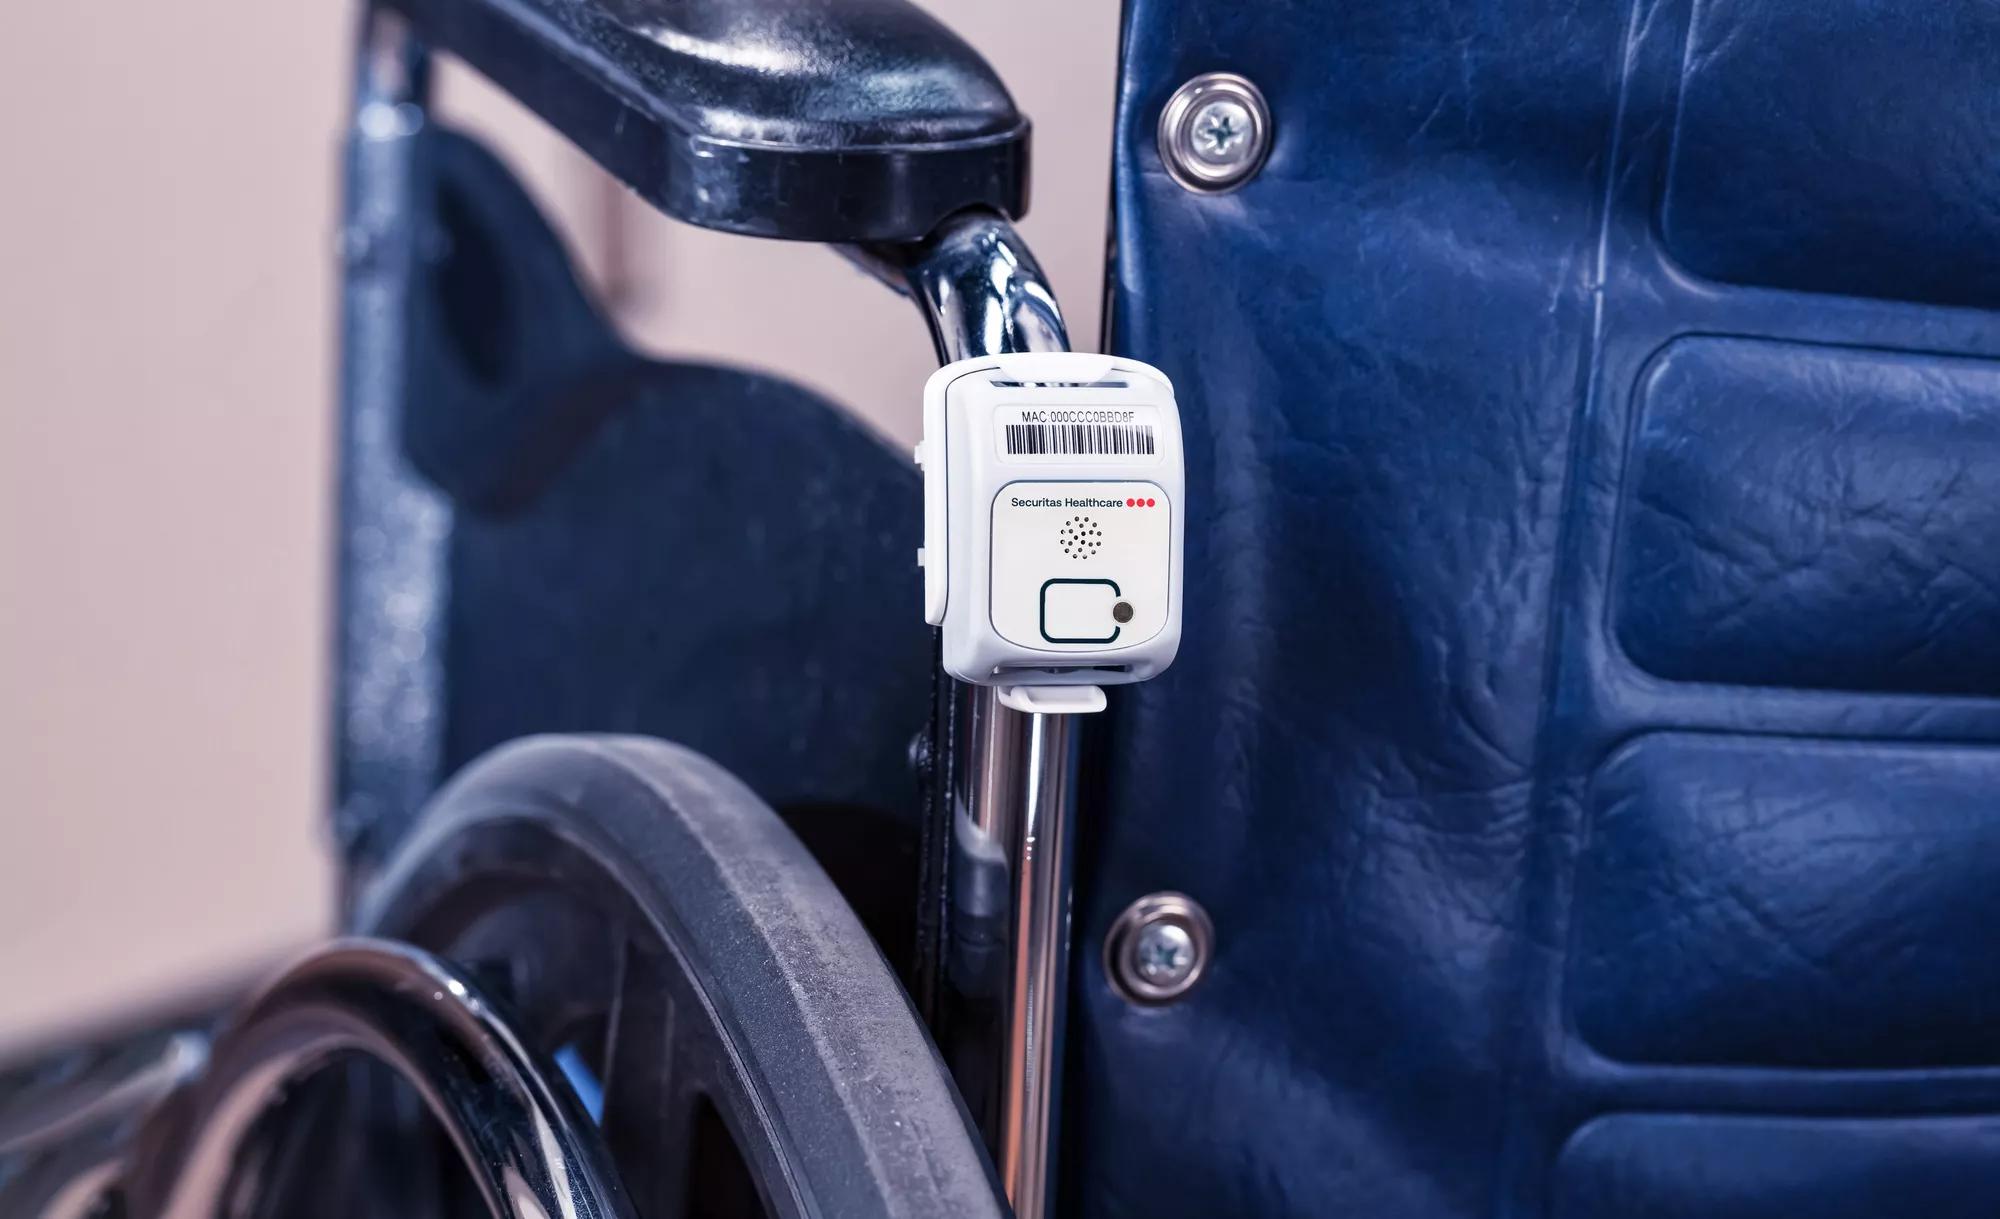 T2su asset management tag attached to a wheelchair. Securitas Healthcare asset tracking.